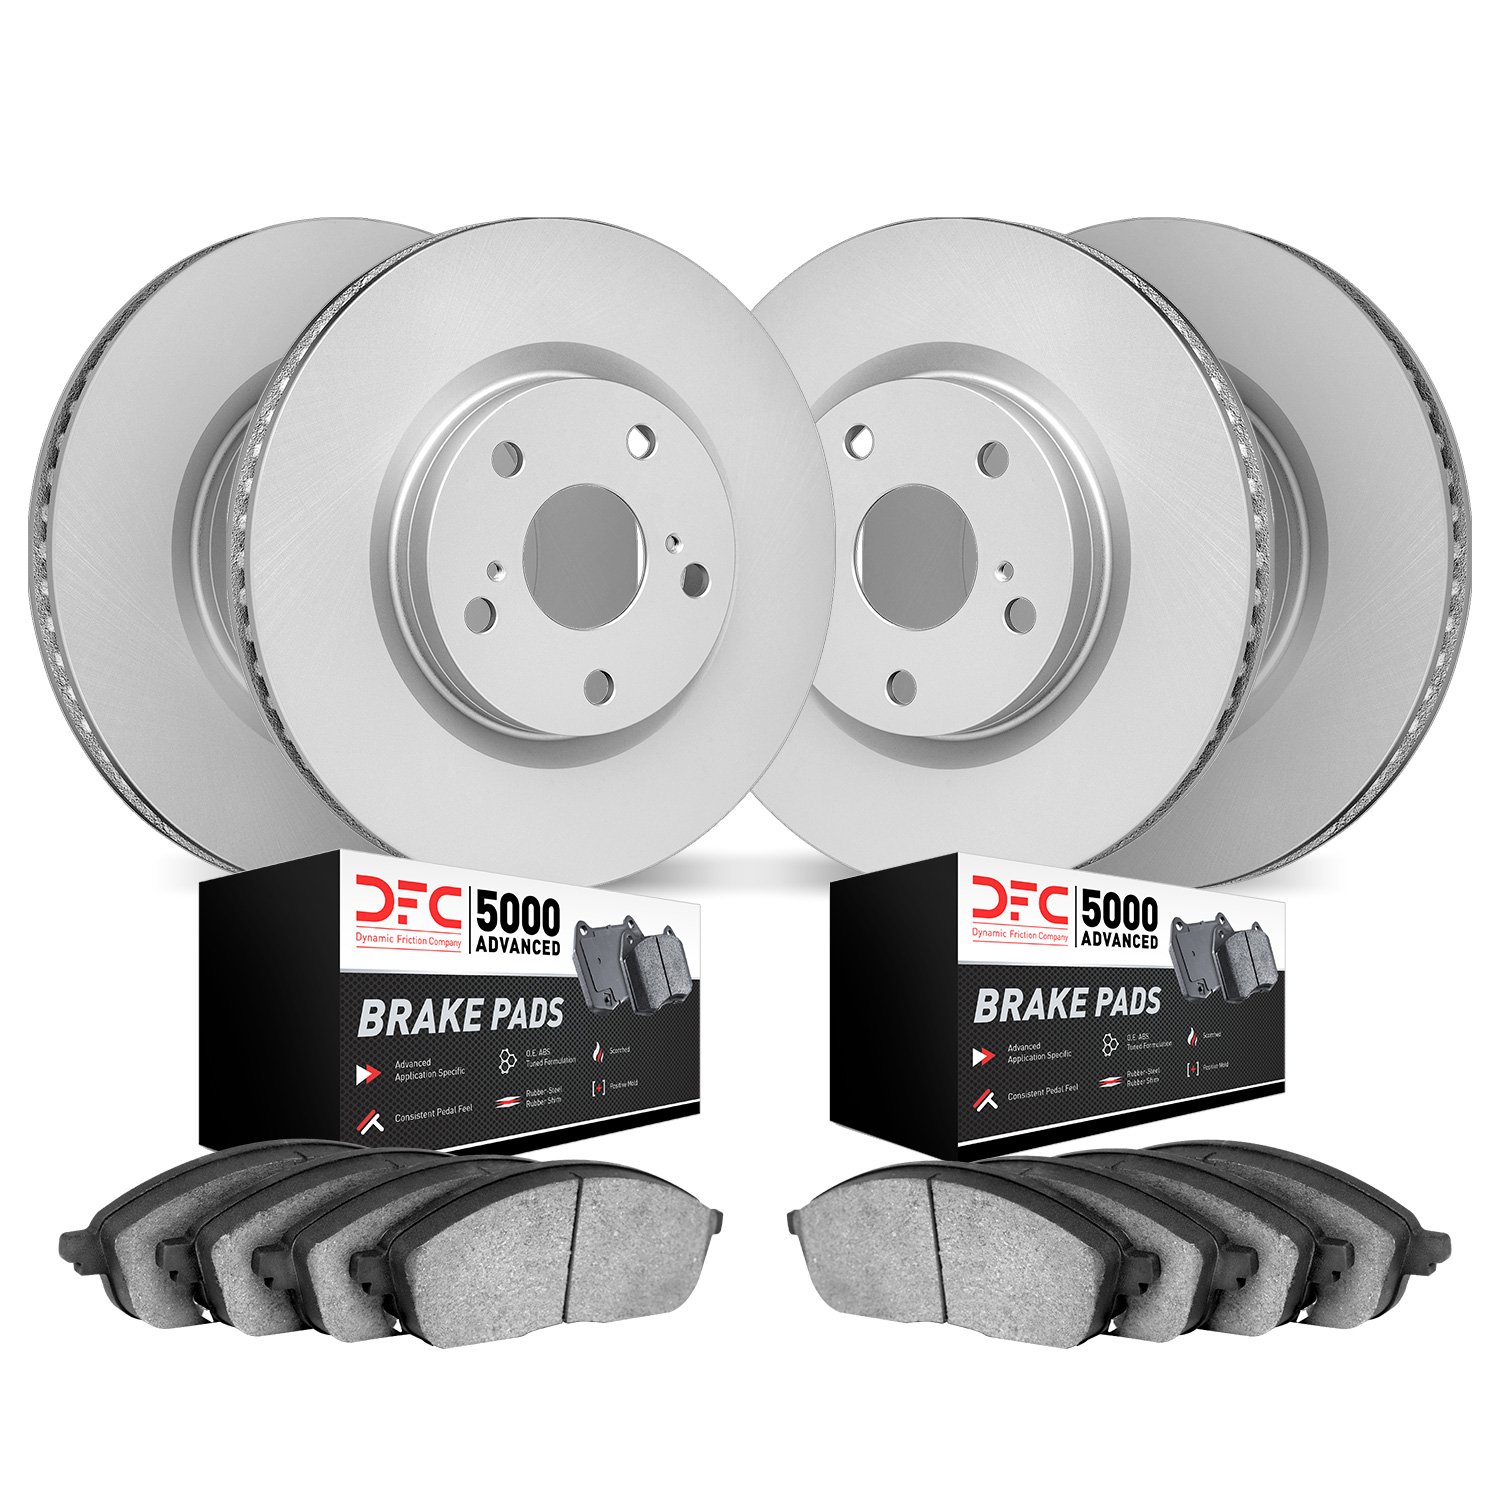 4504-31171 Geospec Brake Rotors w/5000 Advanced Brake Pads Kit, Fits Select BMW, Position: Front and Rear